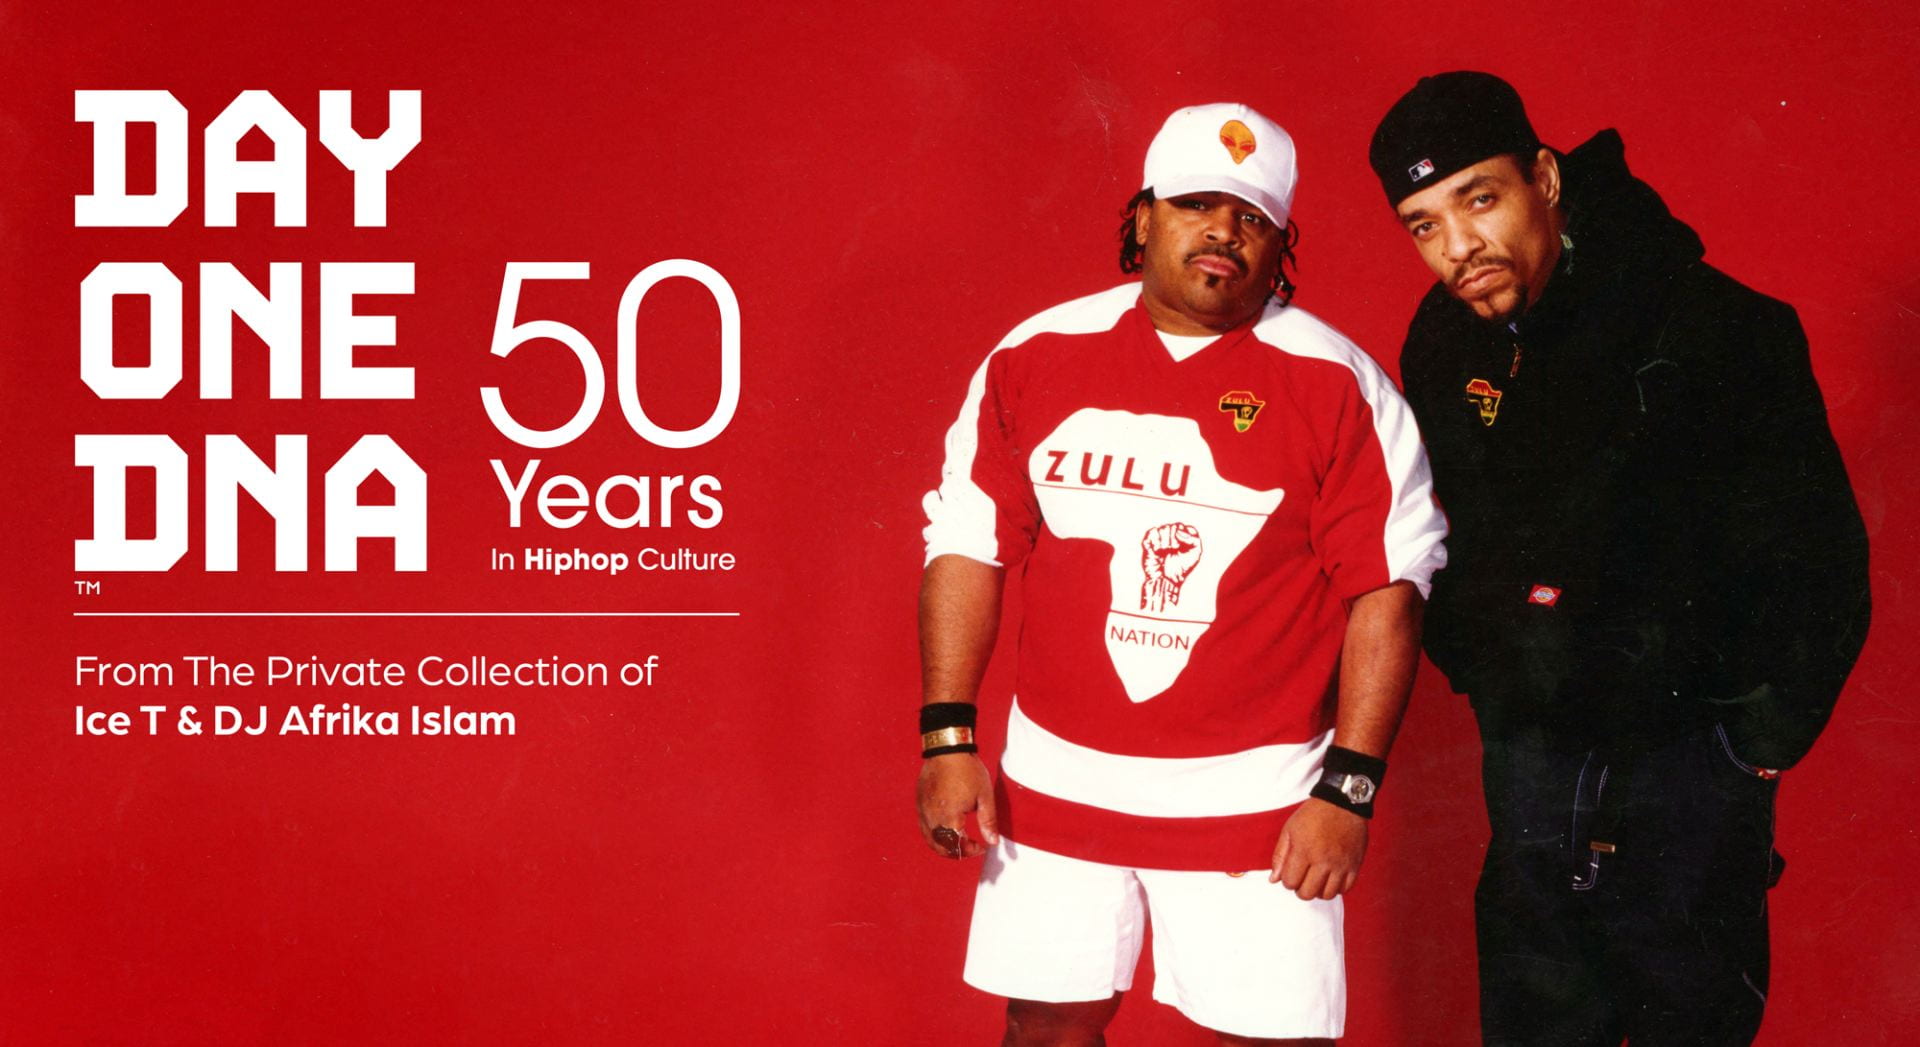 Afrika Islam and Ice T stand together looking seriously into the camera. Afrika is wearing a white baseball cap with an alien on it and a sweatshirt for Zulu Nation with a raised fist in the center of Africa. Ice T wears a black sweatshirt for Zulu Nation with a small Africa logo and a backwards black baseball hat.